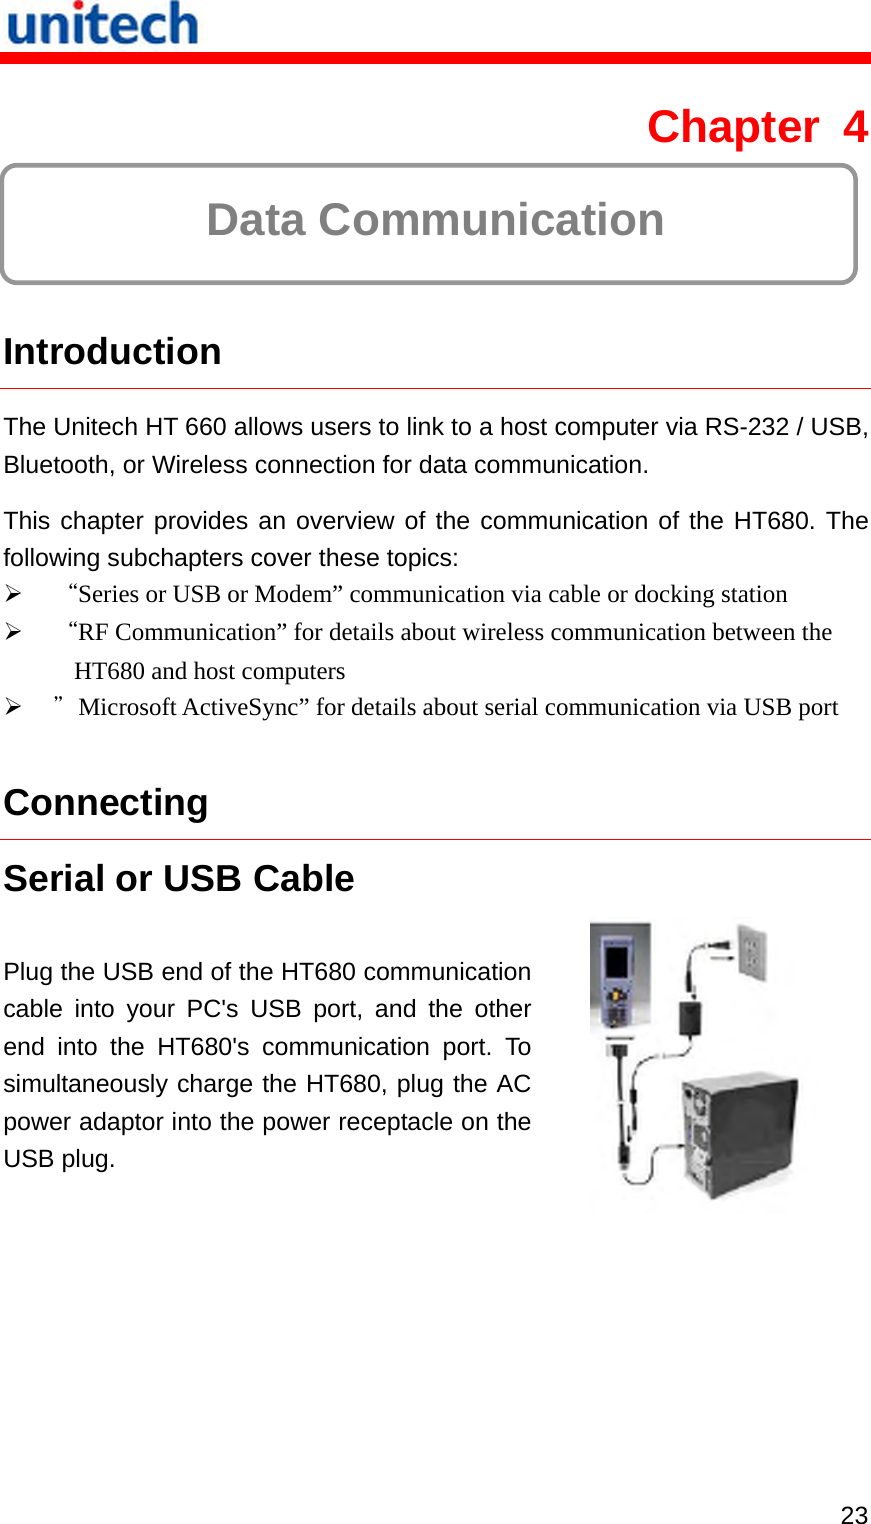   23 Chapter 4  Data Communication  Introduction The Unitech HT 660 allows users to link to a host computer via RS-232 / USB, Bluetooth, or Wireless connection for data communication. This chapter provides an overview of the communication of the HT680. The following subchapters cover these topics:   “Series or USB or Modem” communication via cable or docking station   “RF Communication” for details about wireless communication between the HT680 and host computers   ＂Microsoft ActiveSync” for details about serial communication via USB port Connecting Serial or USB Cable Plug the USB end of the HT680 communication cable into your PC&apos;s USB port, and the other end into the HT680&apos;s communication port. To simultaneously charge the HT680, plug the AC power adaptor into the power receptacle on the USB plug.  